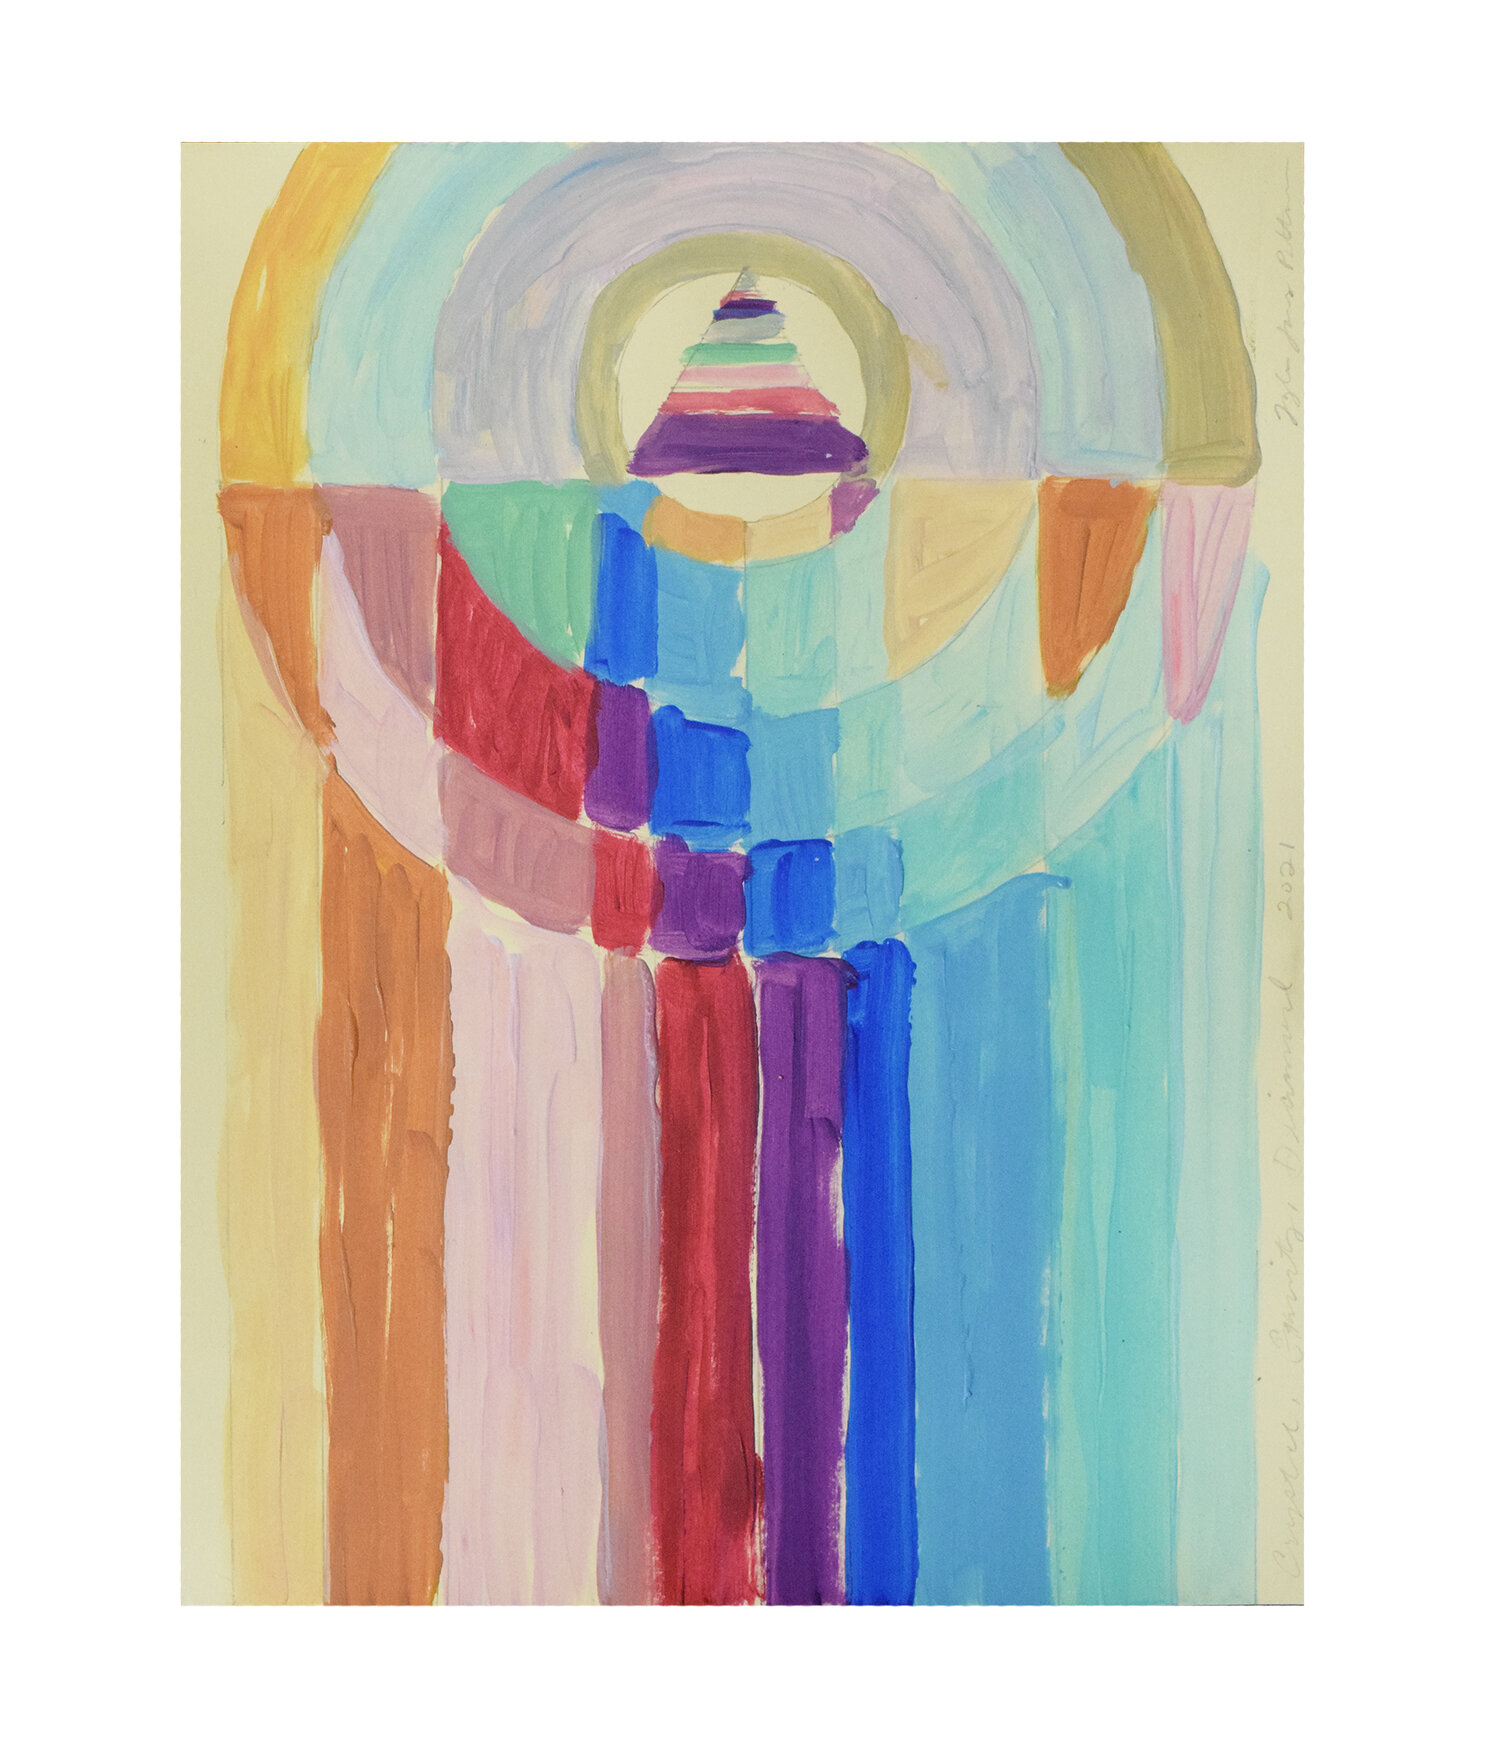 Gravity Rainbow (clay, earth, sapphire), 2021, acrylic on paper, 8.5x11 in.